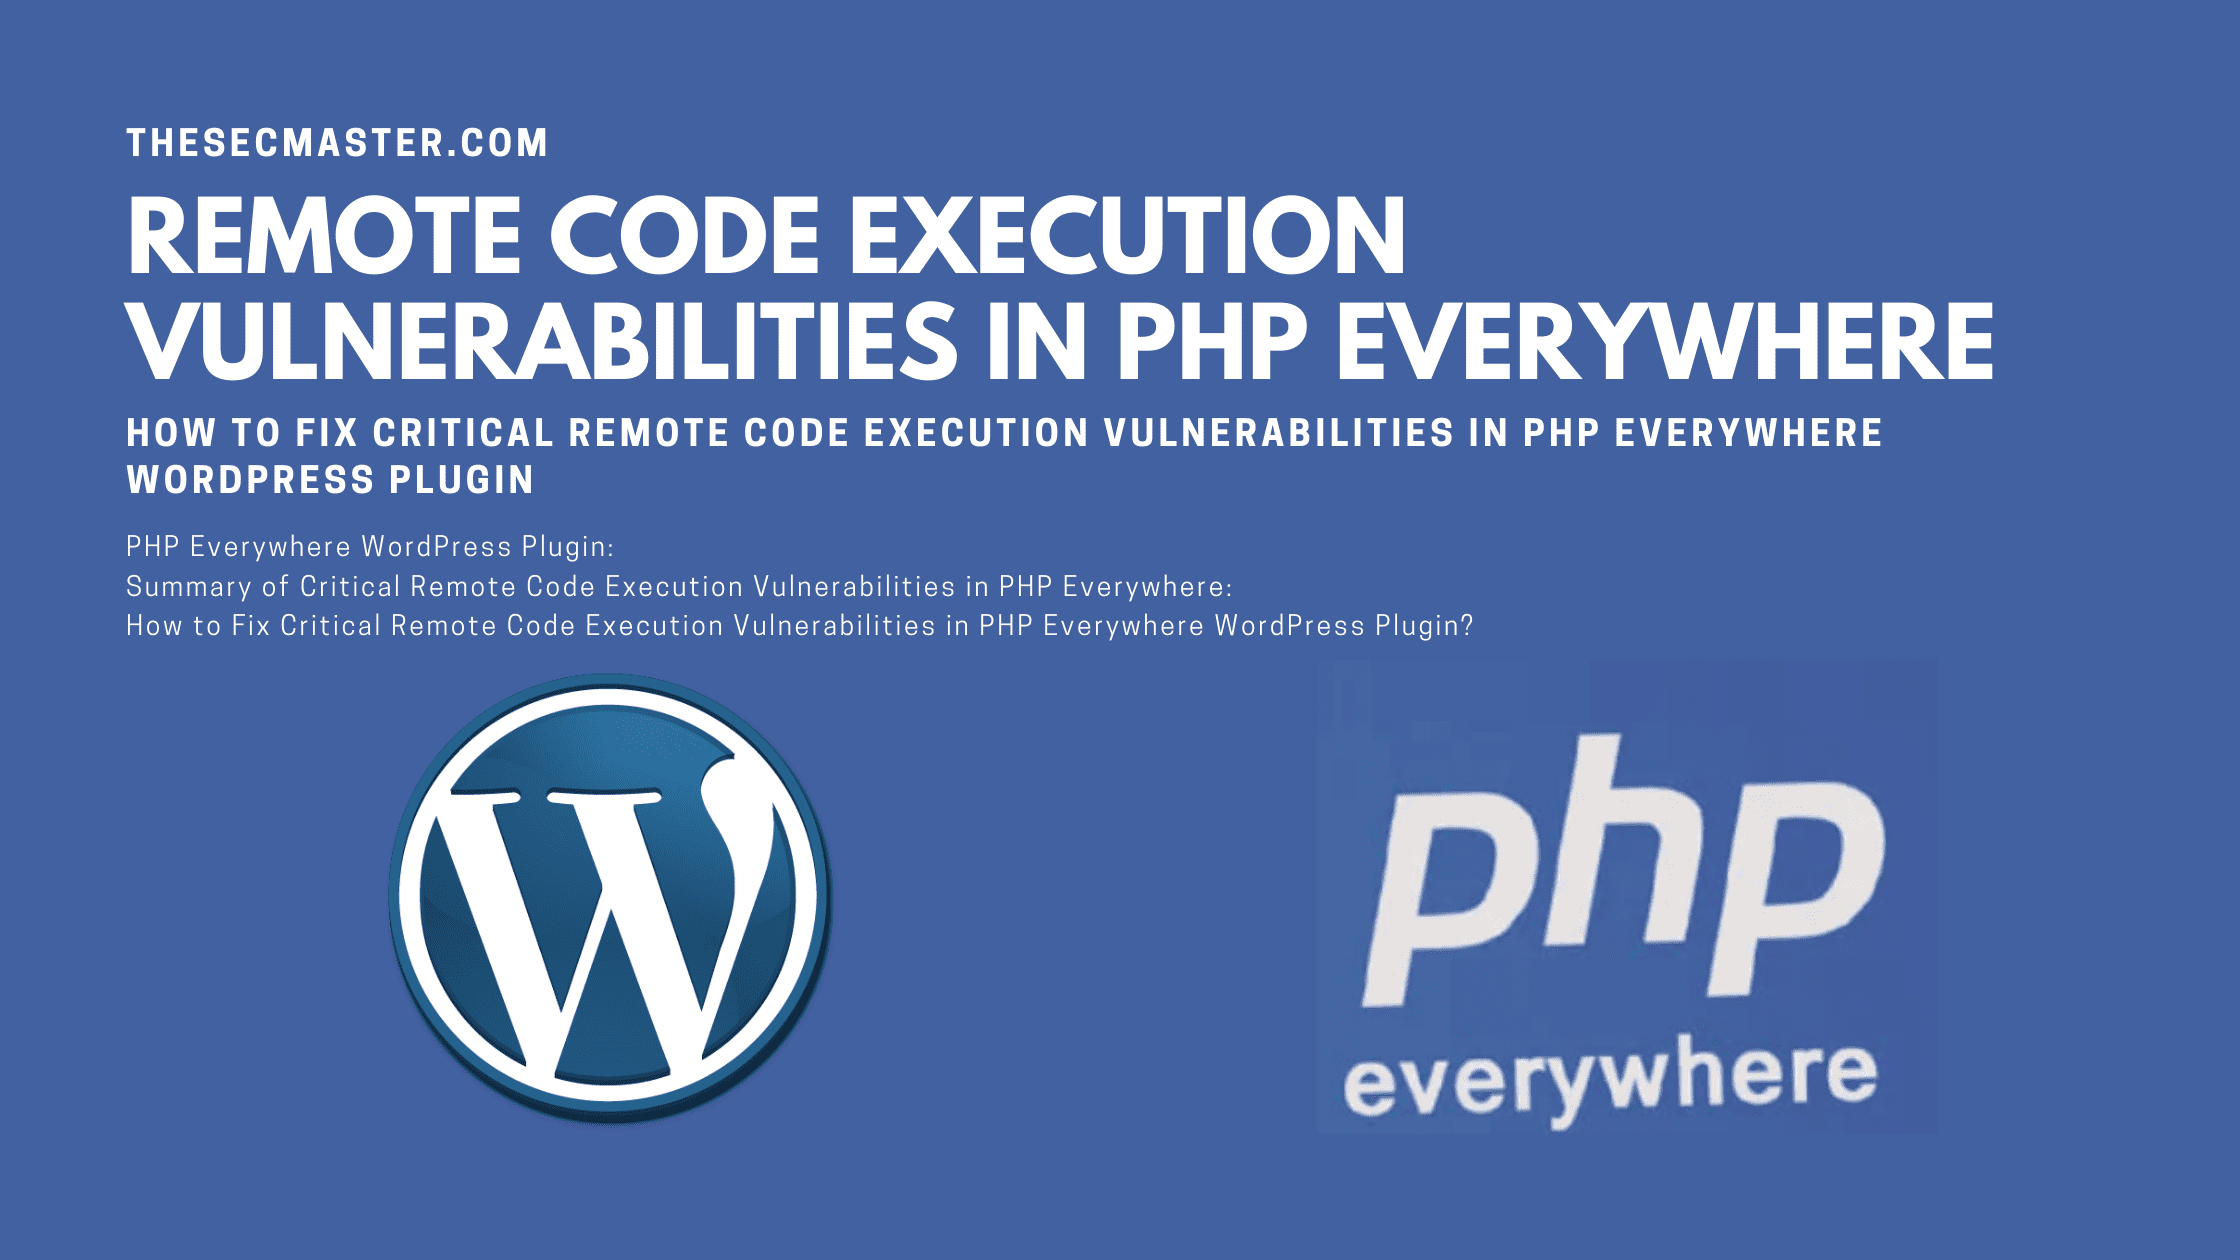 How To Fix Critical Remote Code Execution Vulnerabilities In Php Everywhere Wordpress Plugin